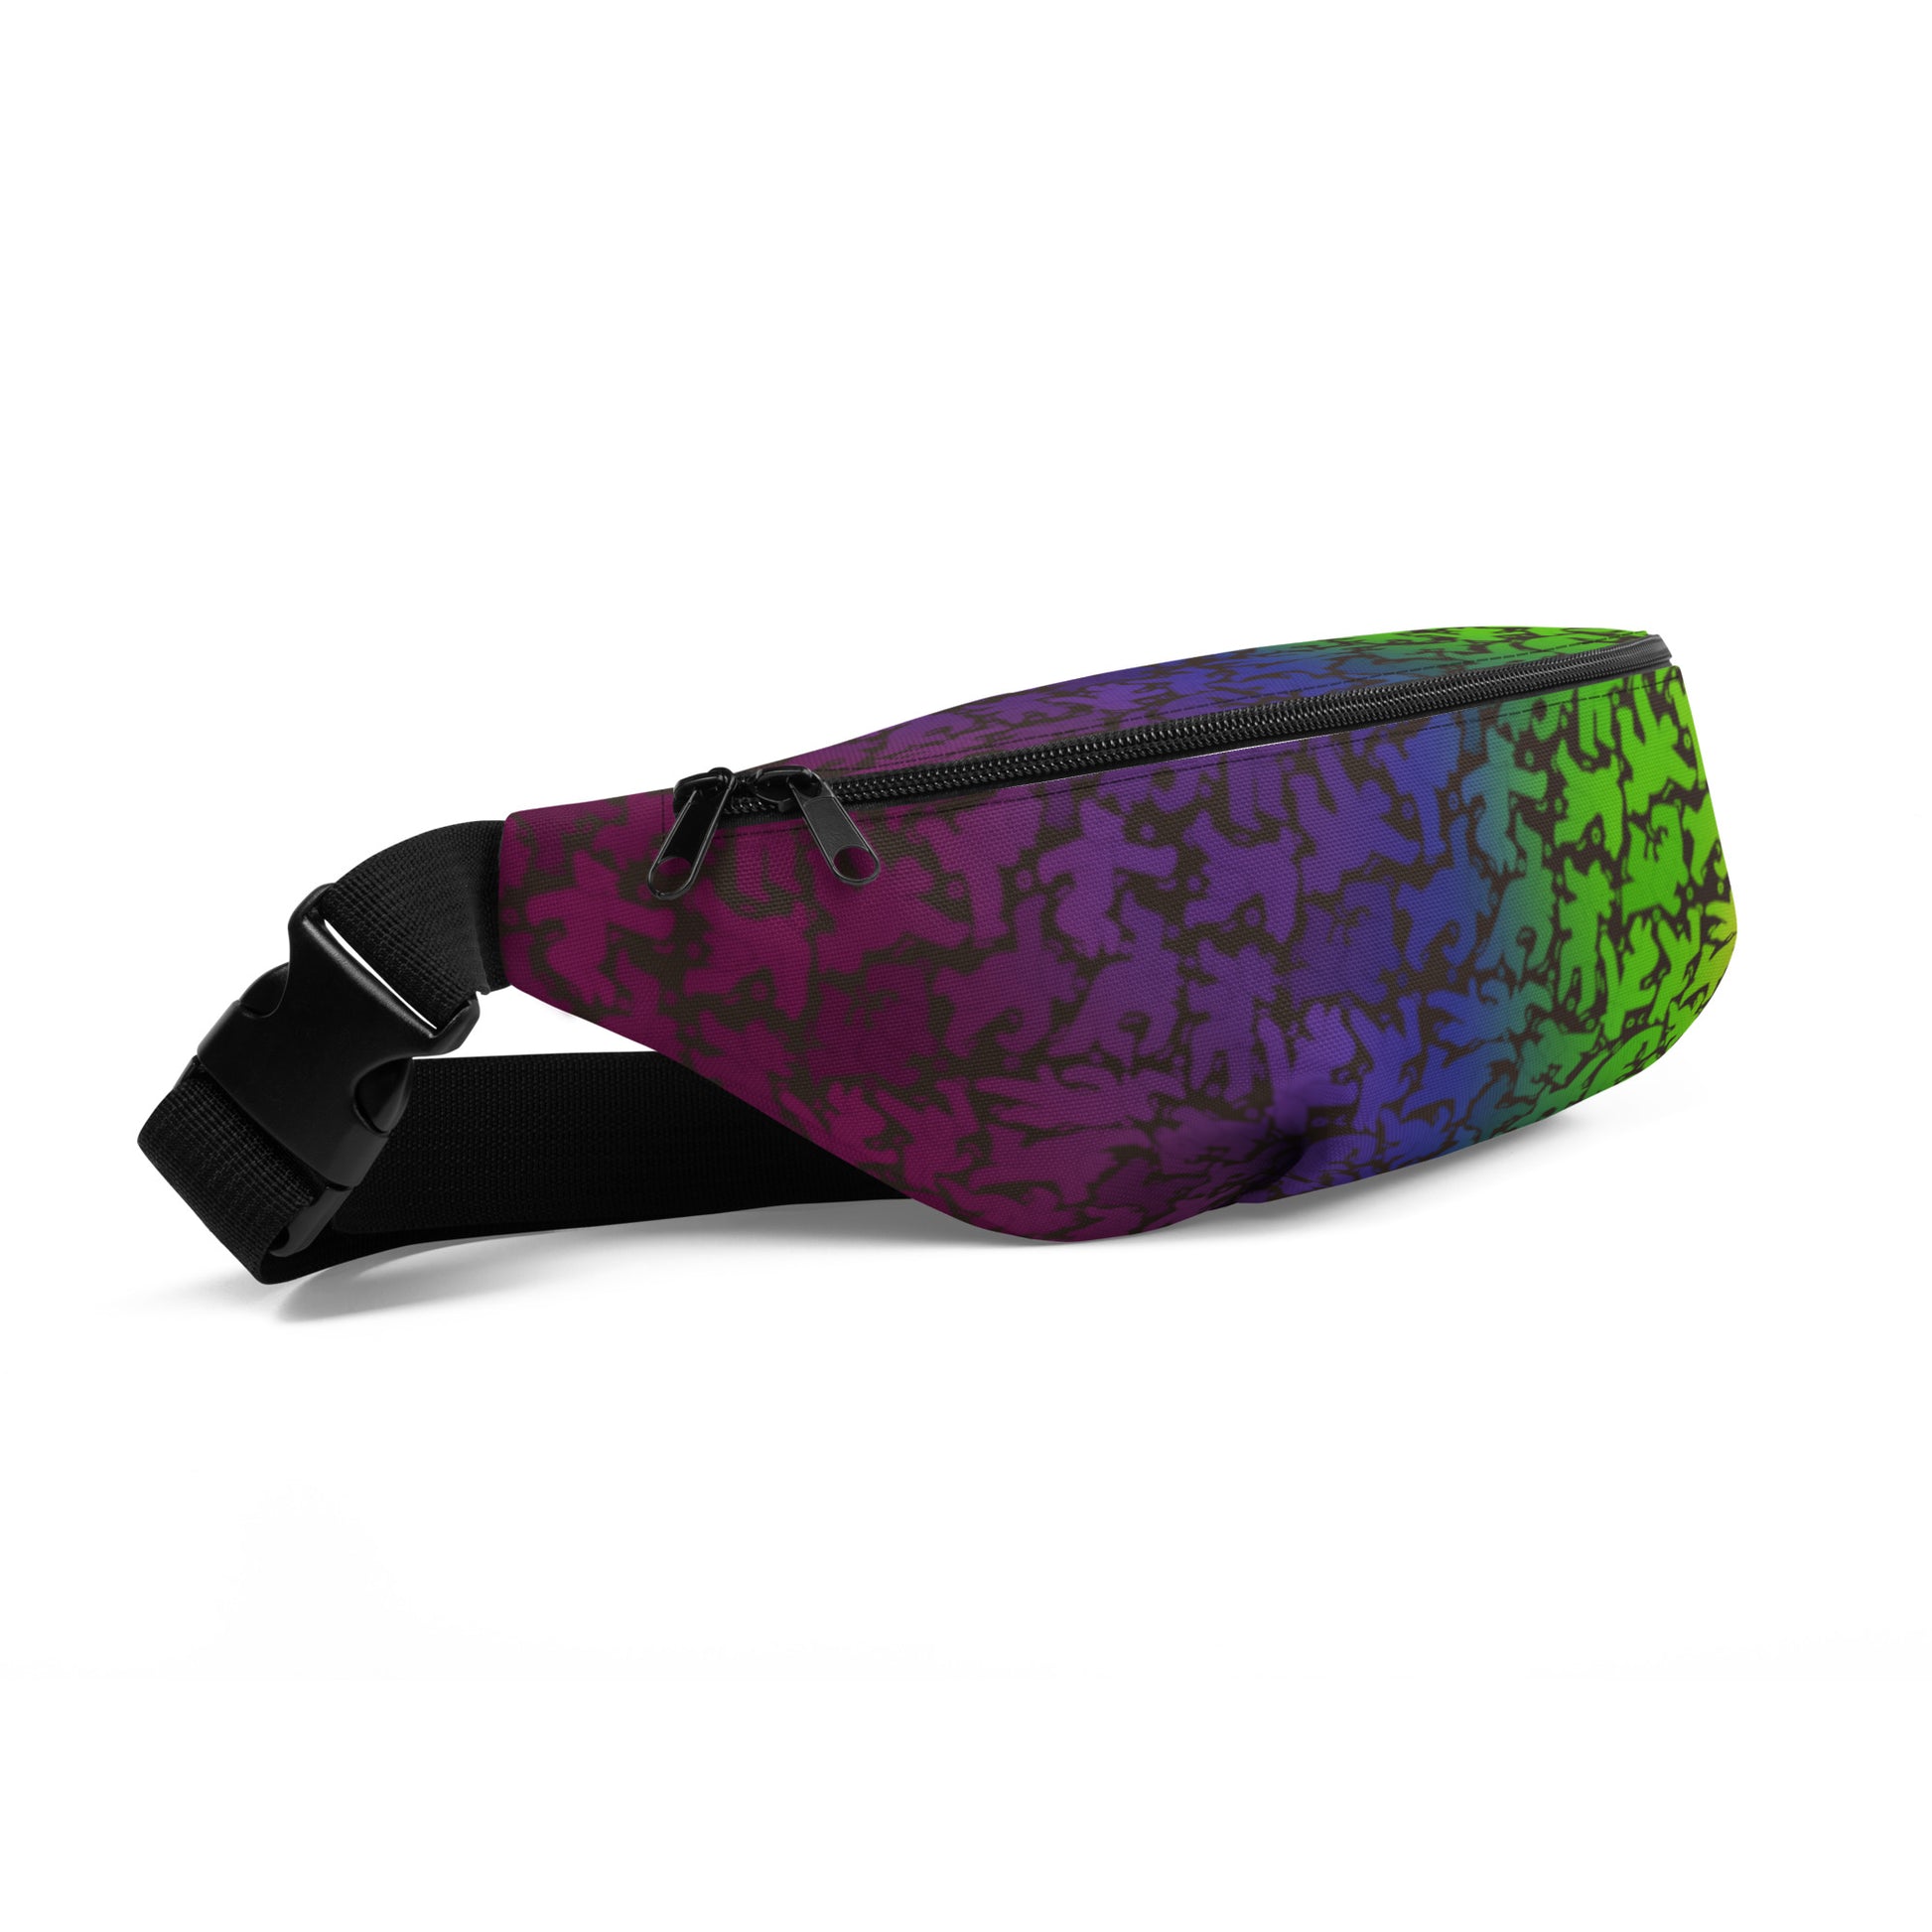 All over print fanny pack featuring rainbow bear pattern in style of Keith Haring 3/4 view